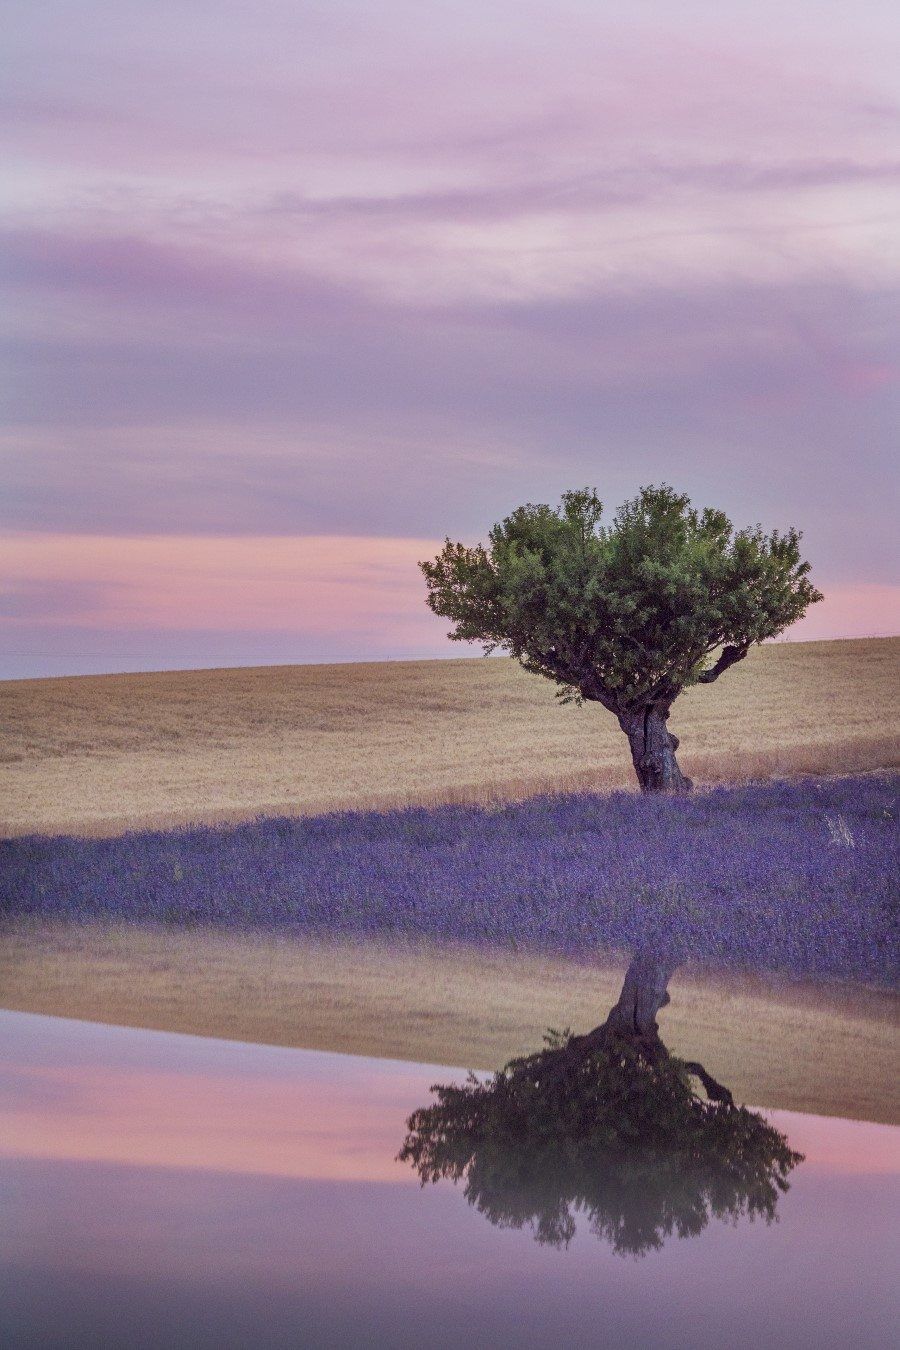 Provence Lavender Fields - Creative Landscape Photography by Lisa Michele Burns of The Wandering Lens